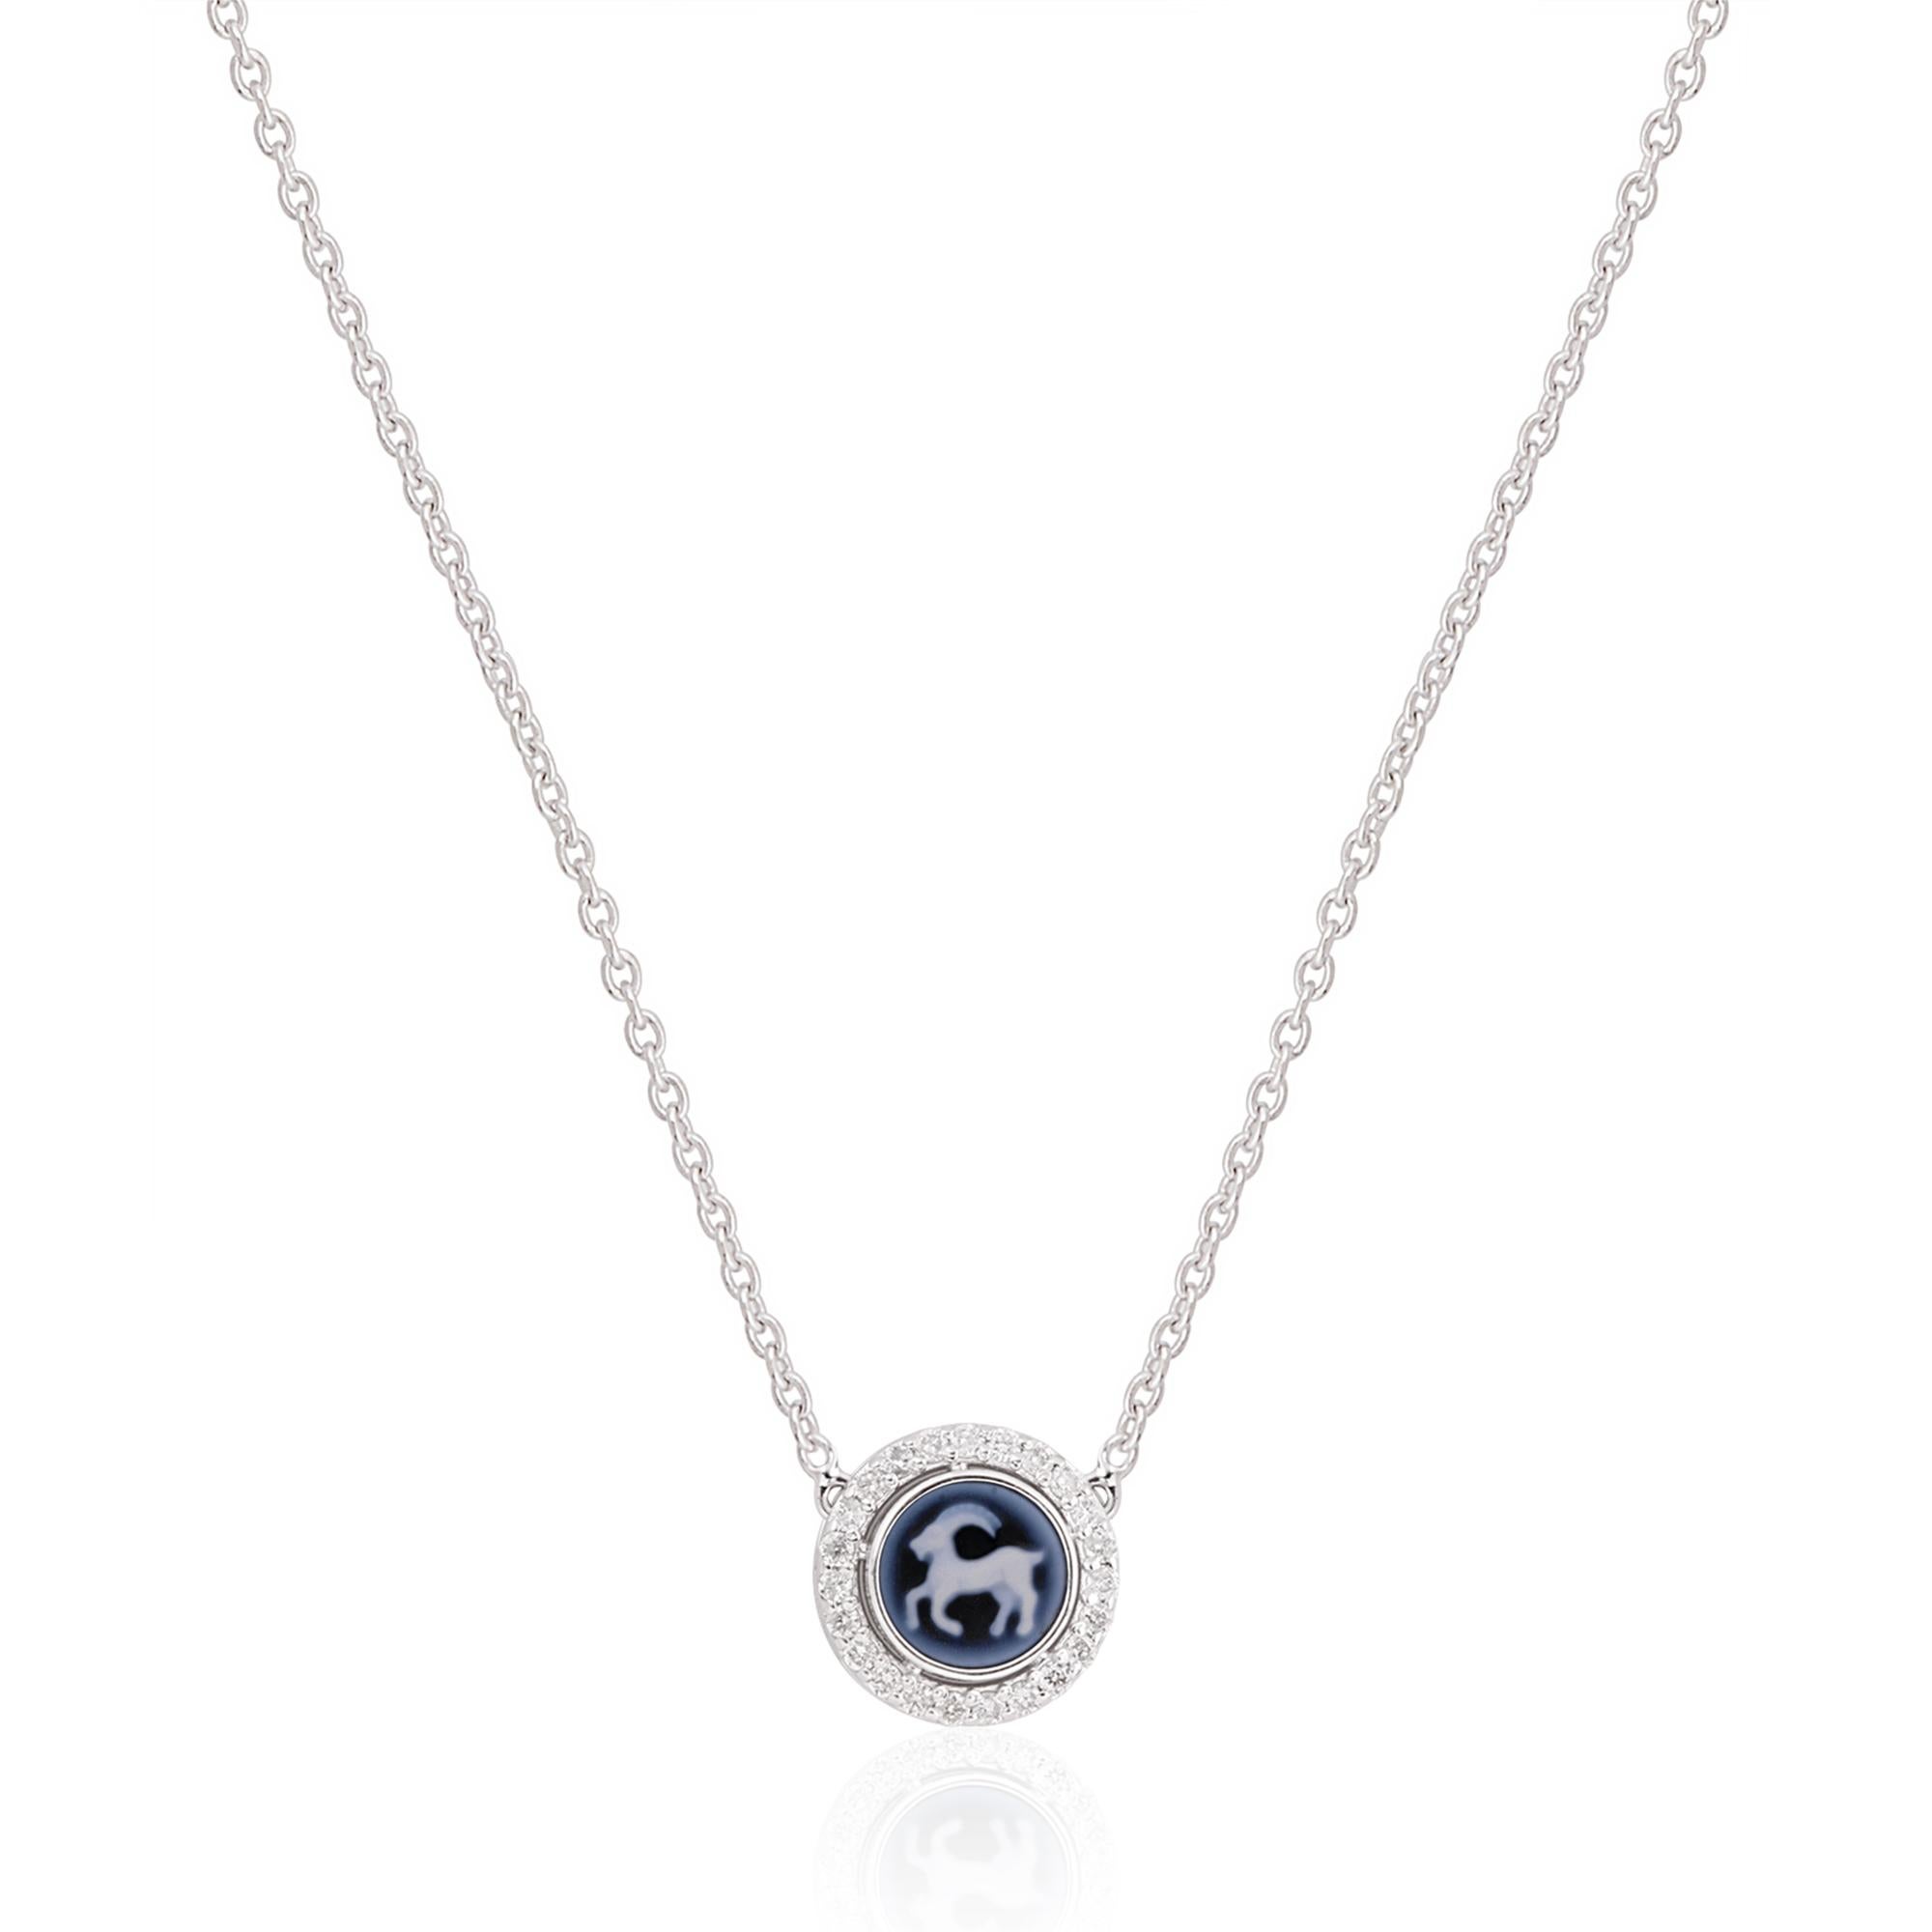 Embrace your astrological identity with this exquisite Capricorn zodiac sign pendant necklace. Meticulously crafted in 14-karat white gold, this fine jewelry piece showcases intricate detailing and shimmering H/SI diamonds, making it a true symbol